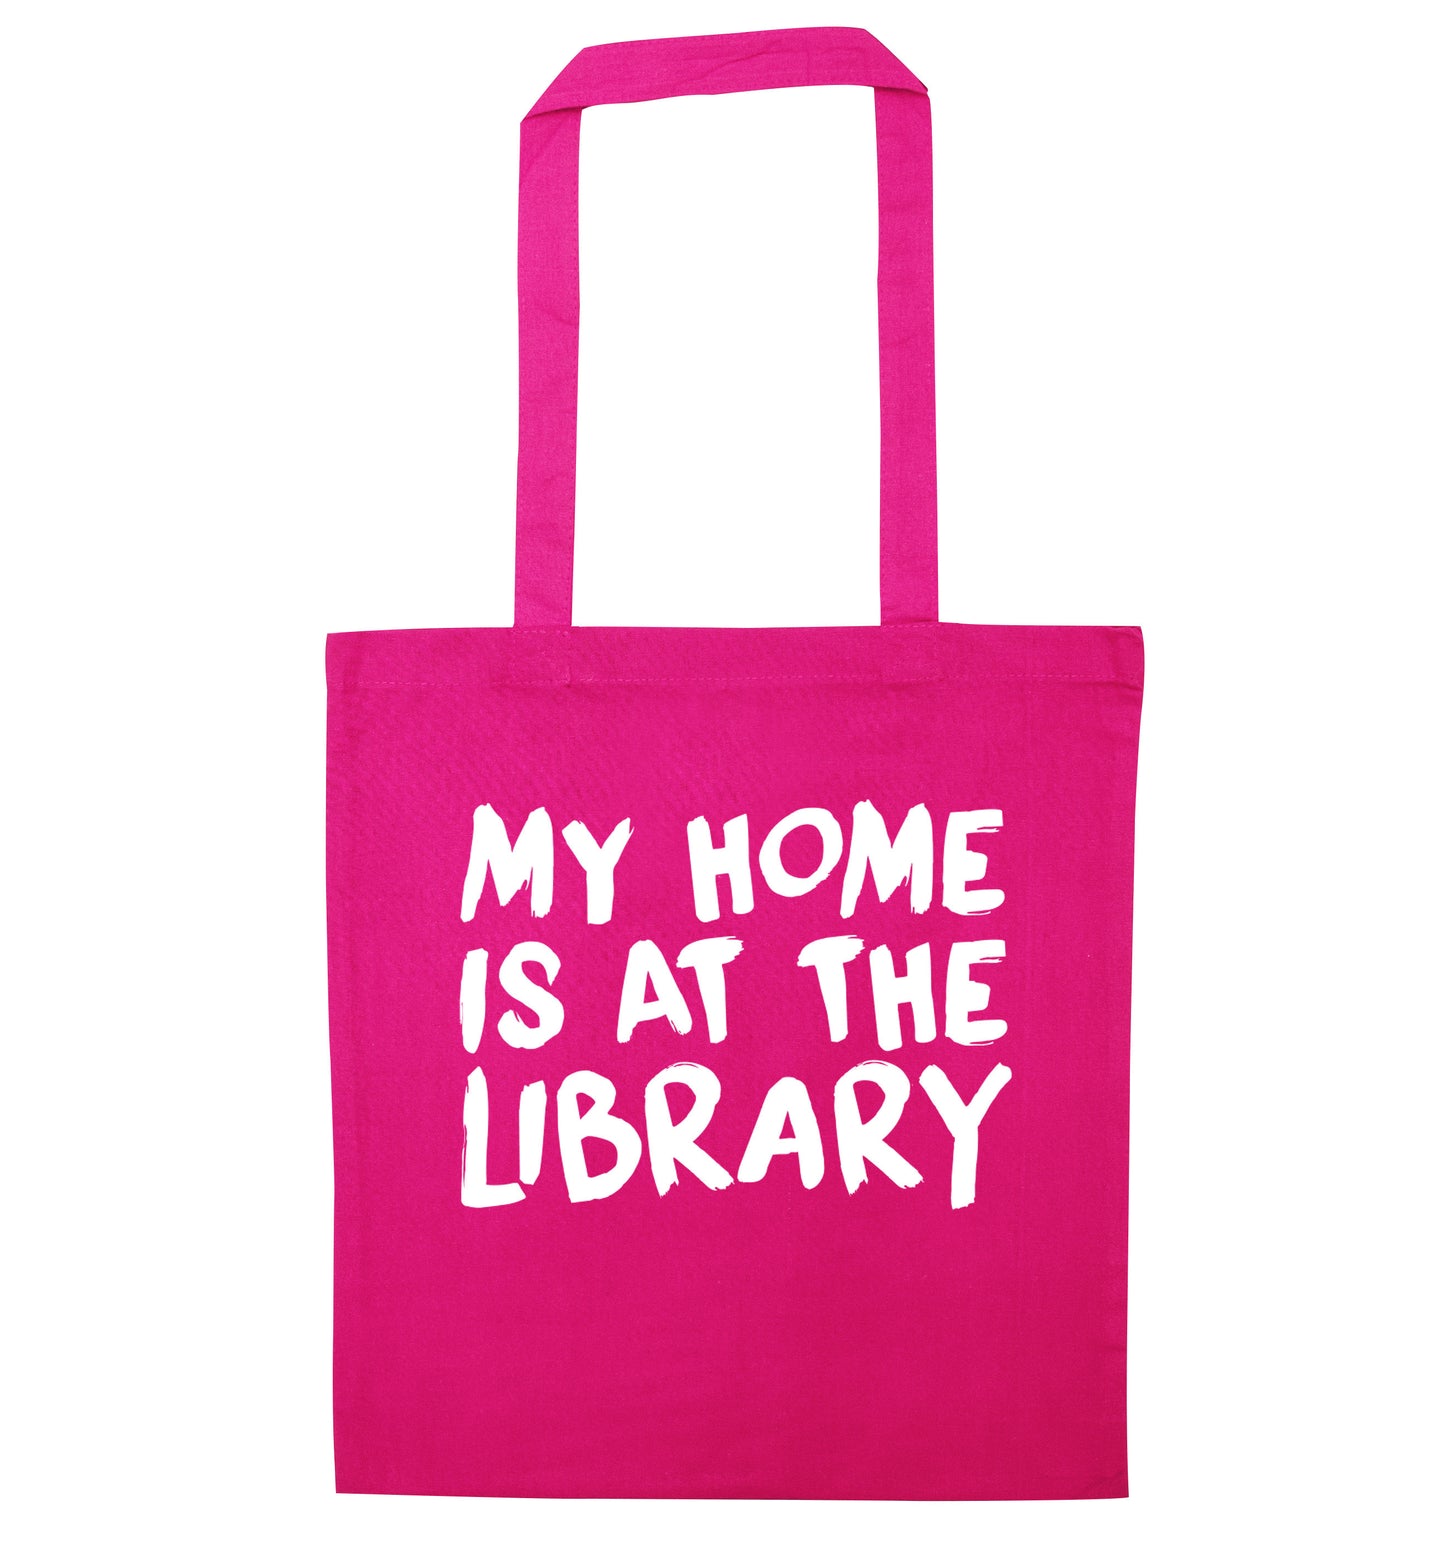 My home is at the library pink tote bag